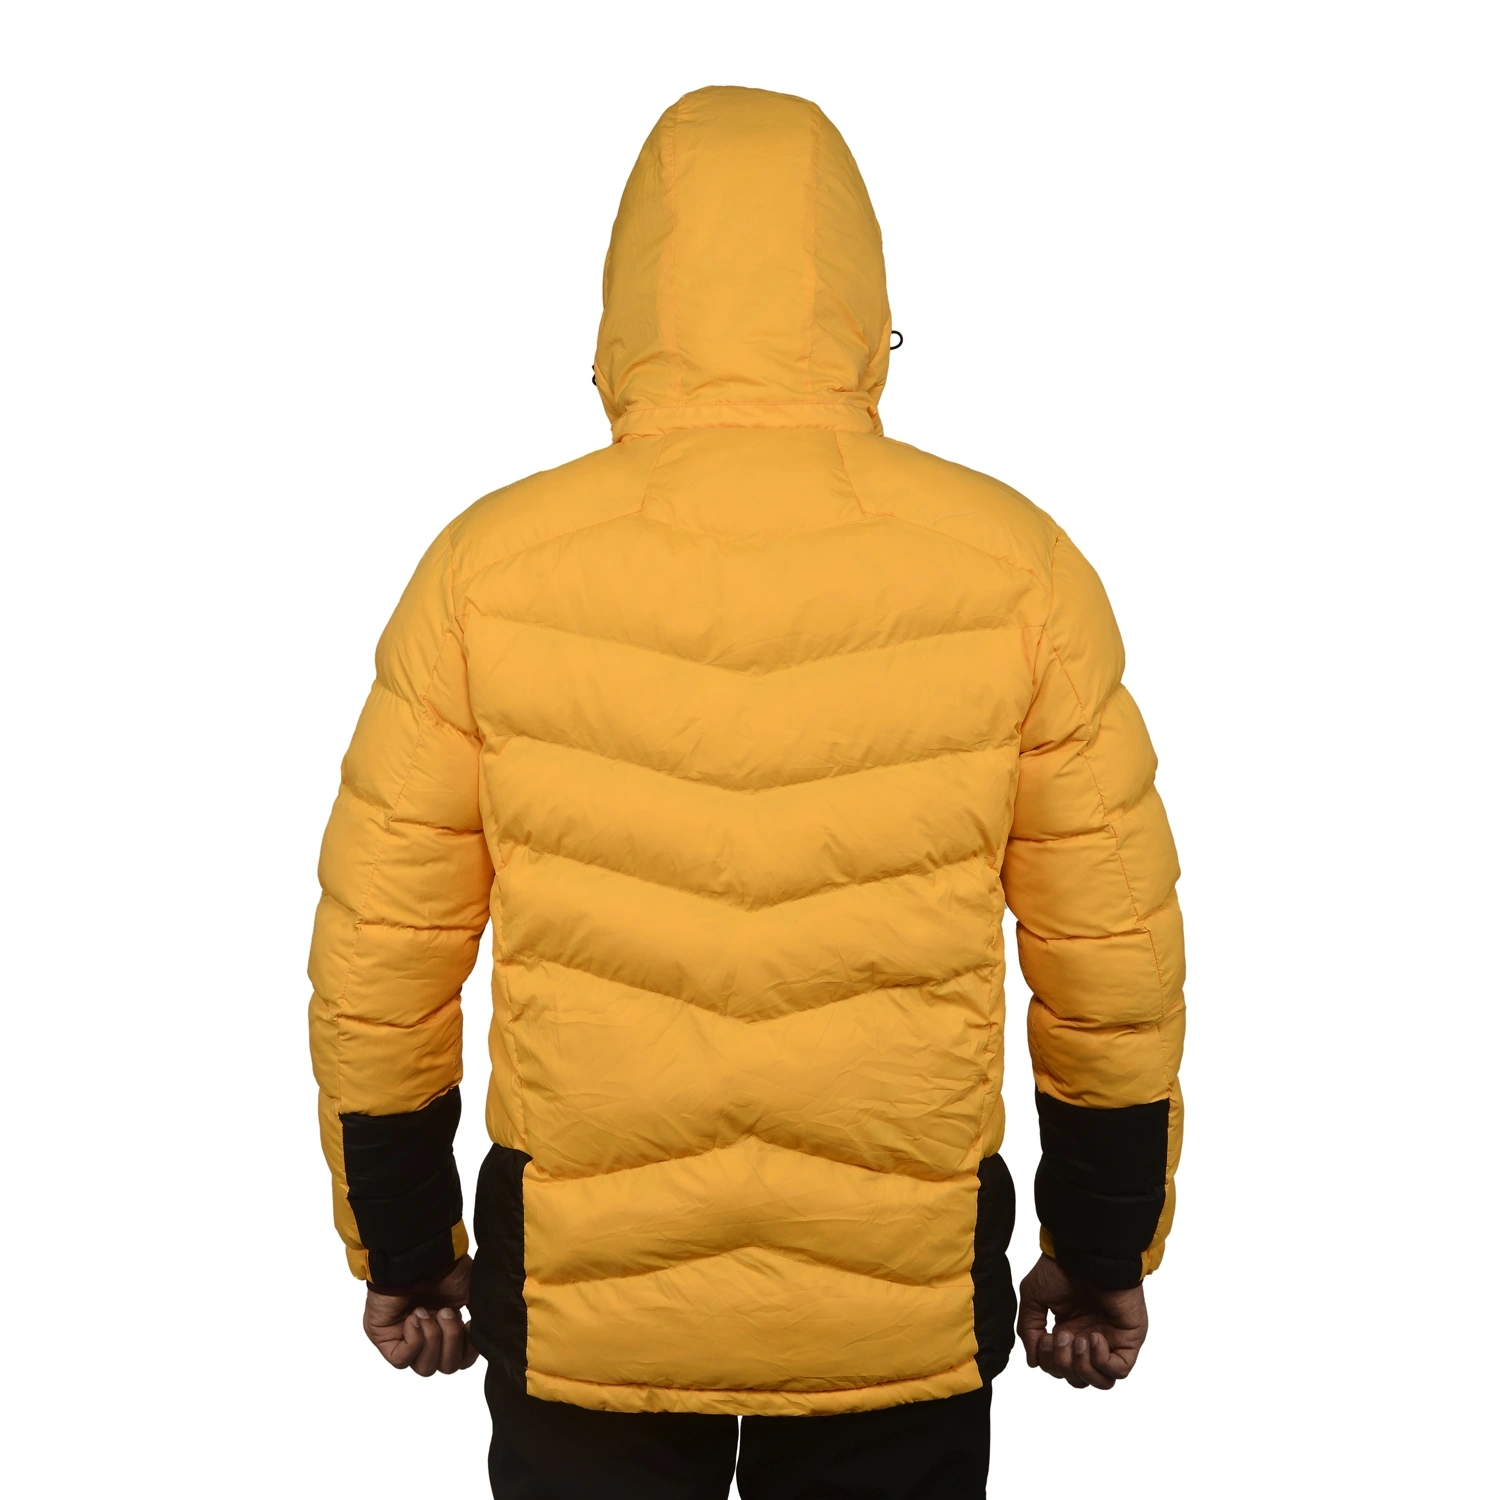 K2 Survivor Down Jacket for Men: Stylized Functionality for Extreme Cold Weather Expeditions (Up to -20°C)-M-Yellow-3